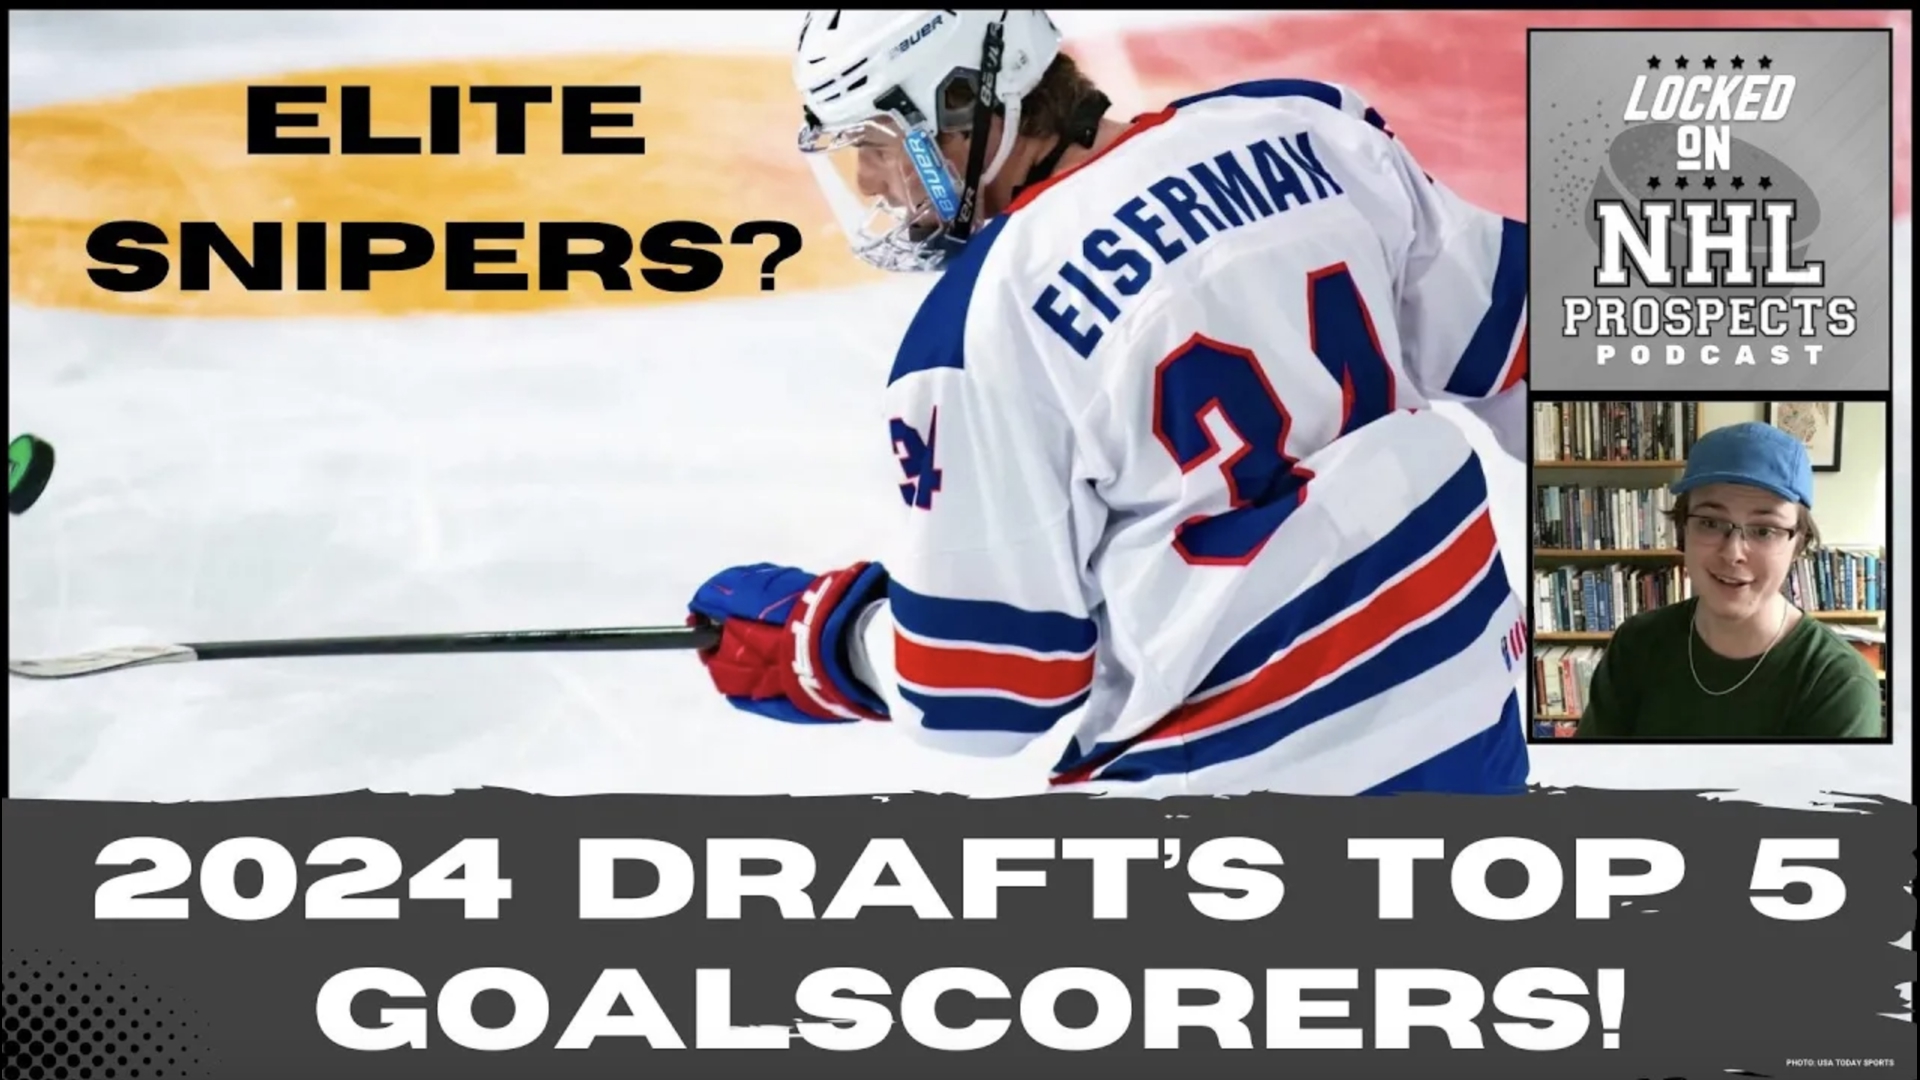 In this episode, Sebastian breaks down his Top 5 goalscorers eligible for the 2024 NHL Draft!